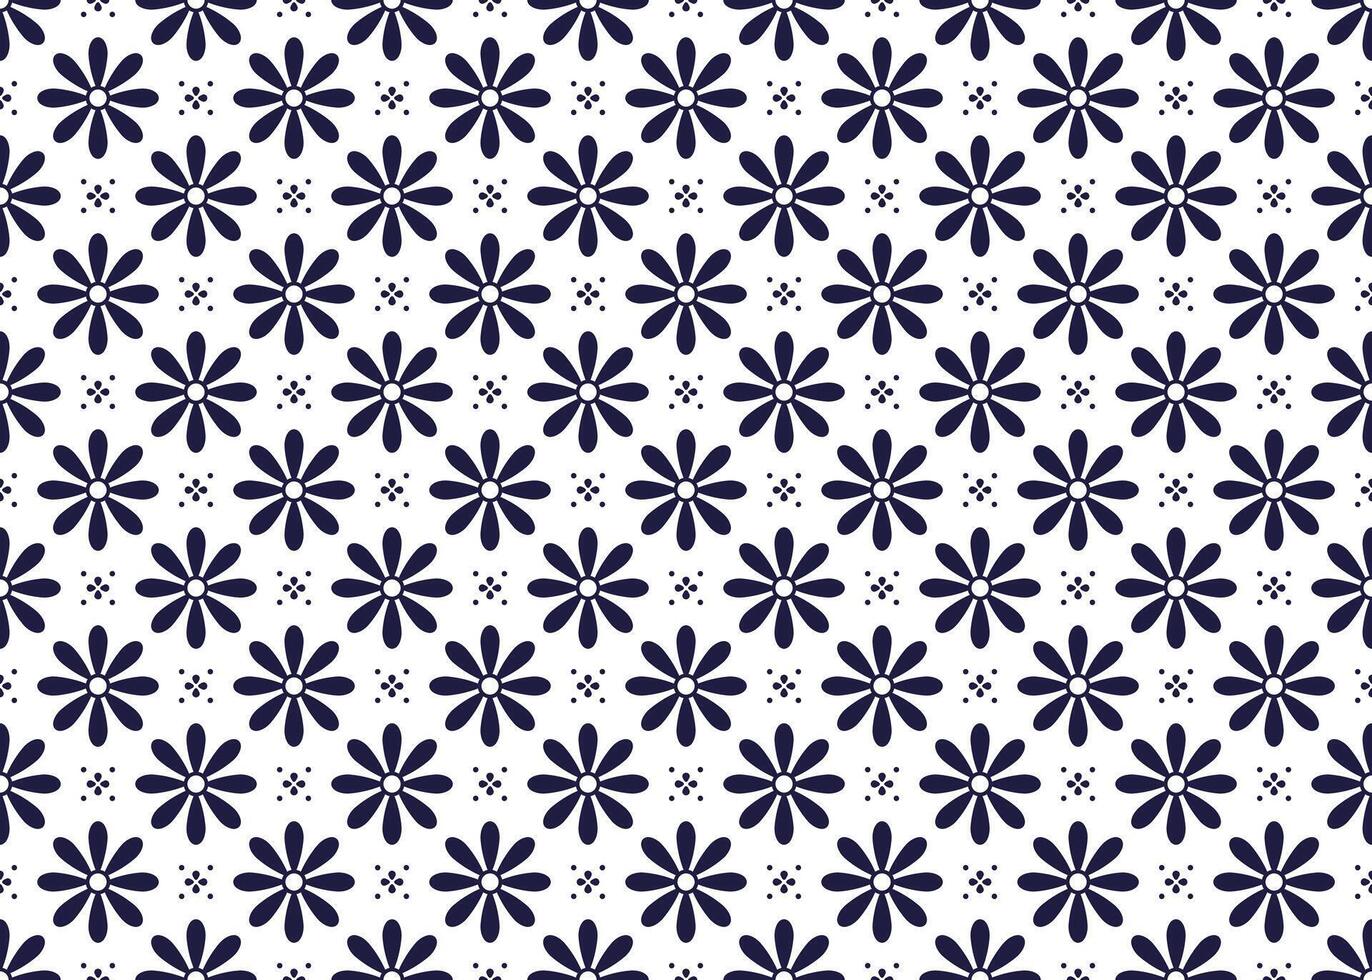 Symbol dark blue floral seamless pattern on a white background vector